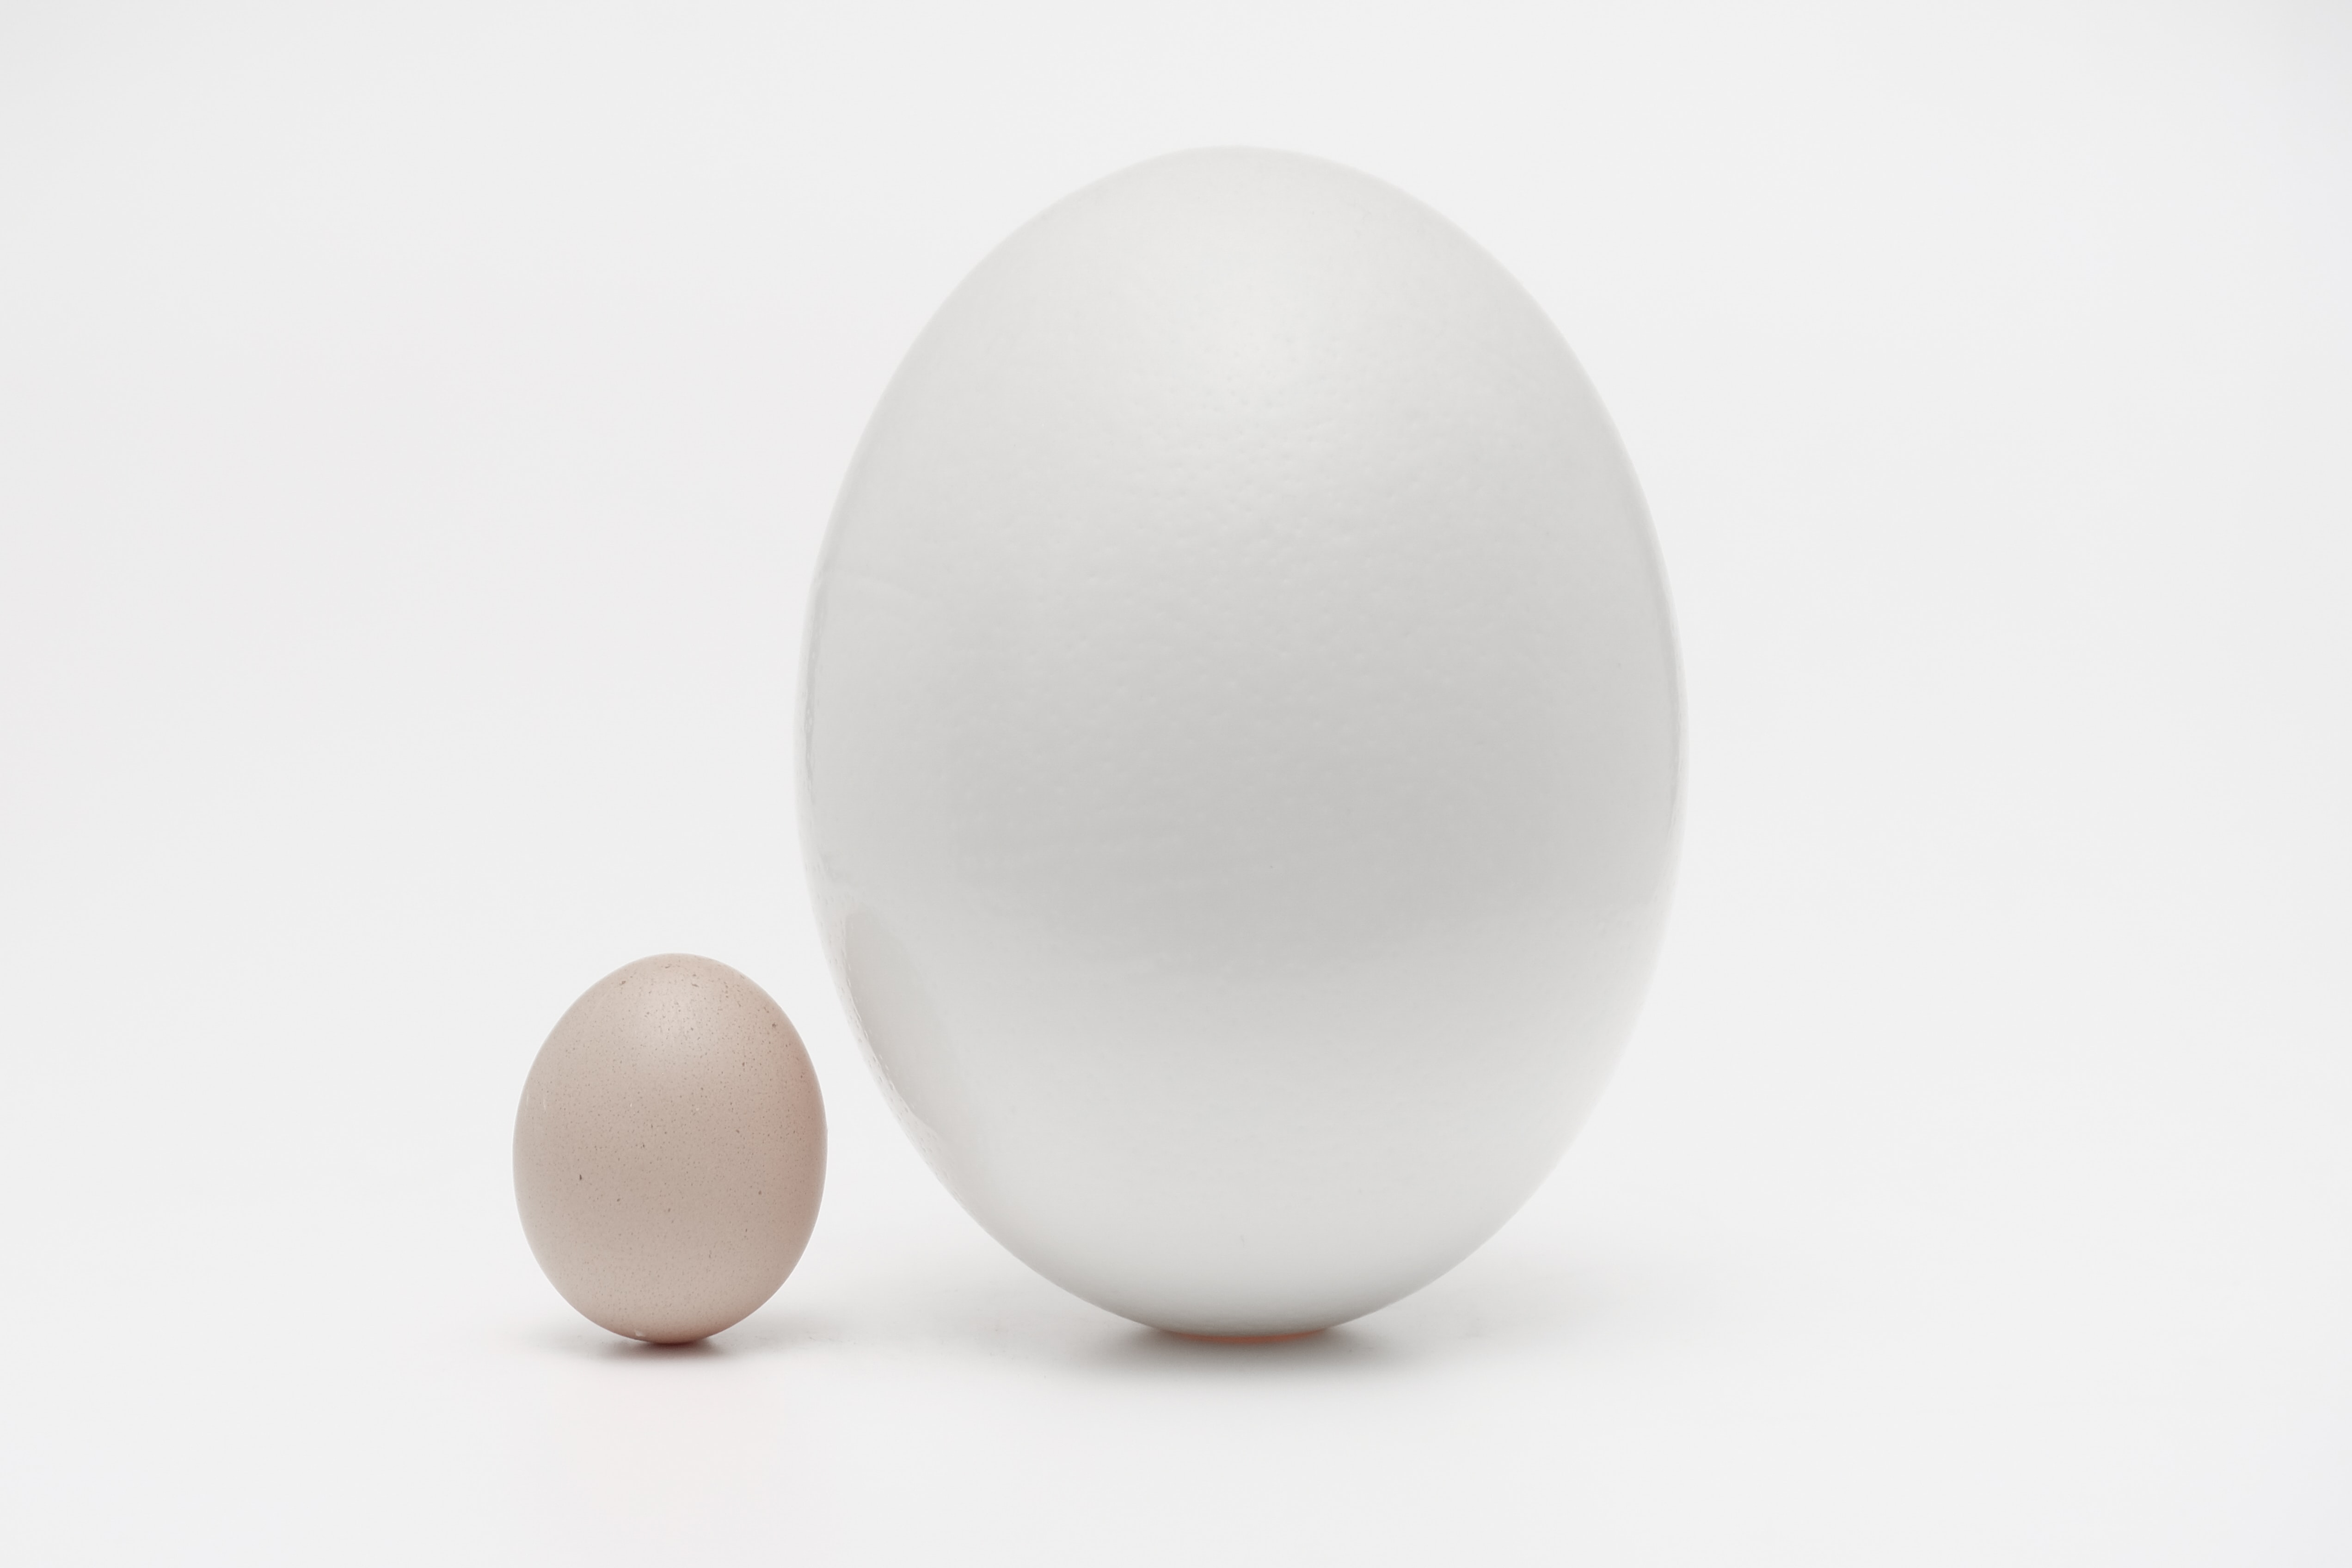 A small egg and a big egg